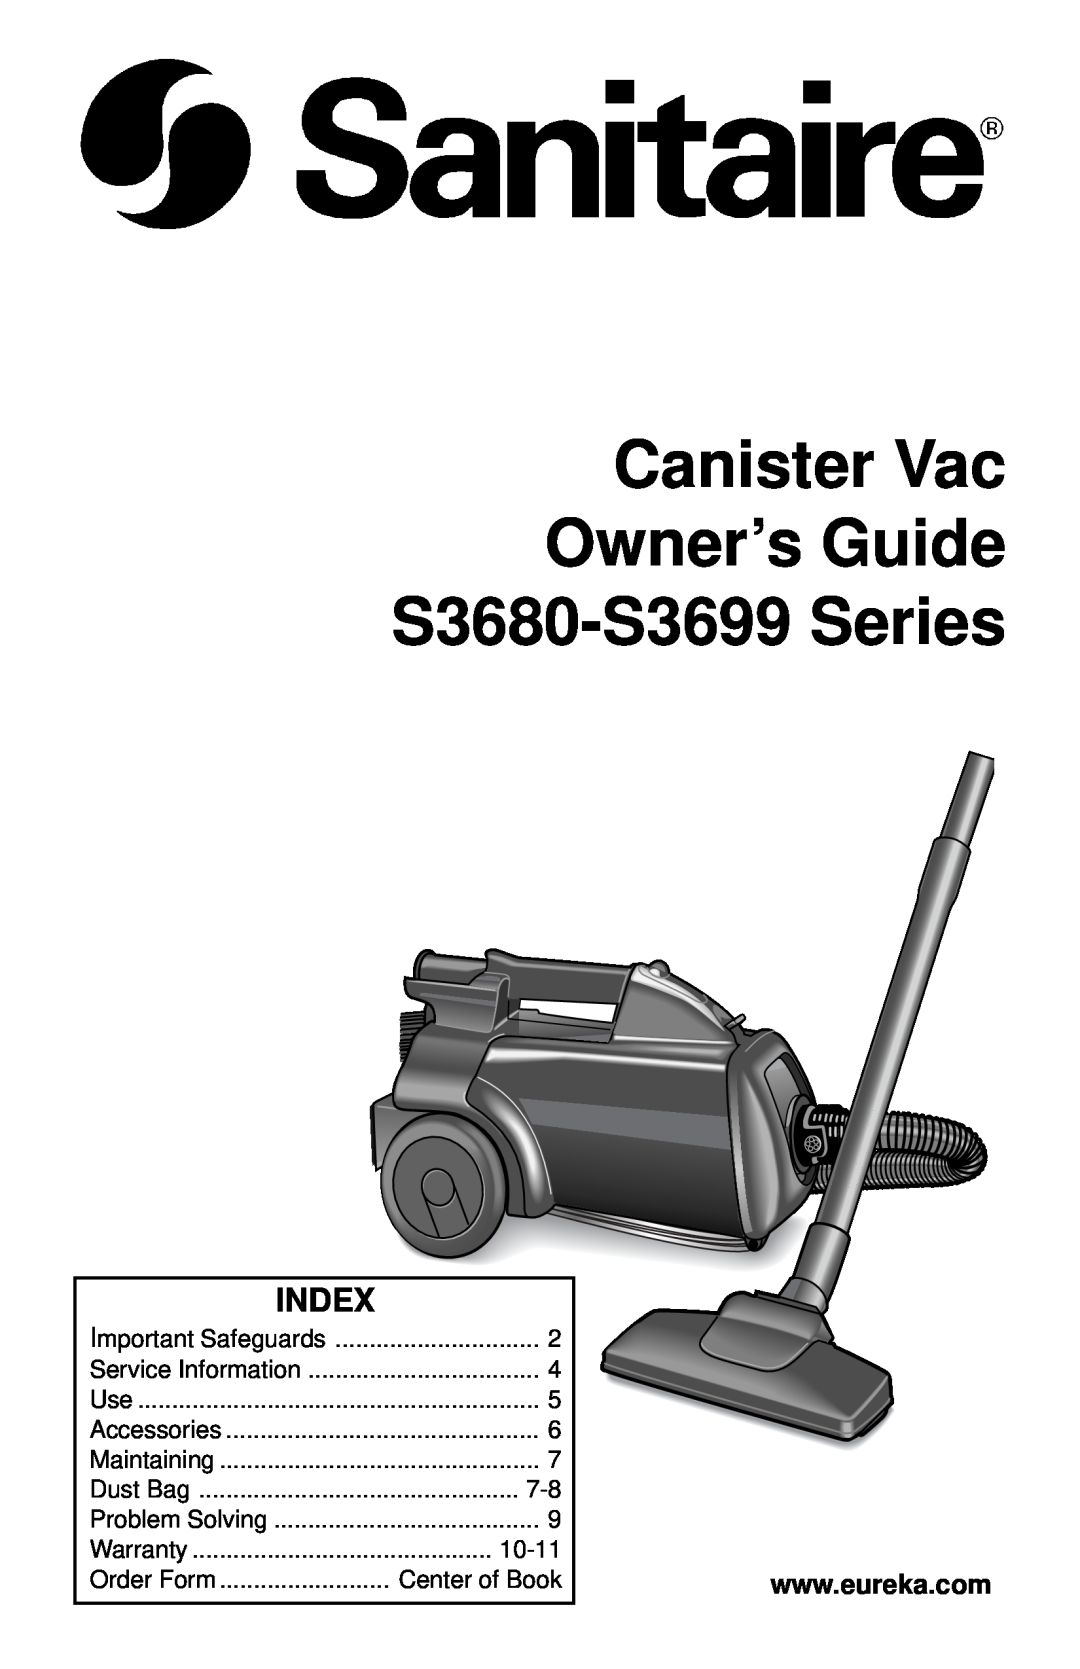 Sanitaire warranty Index, Canister Vac Owner’s Guide S3680-S3699 Series, Important Safeguards, Service Information 